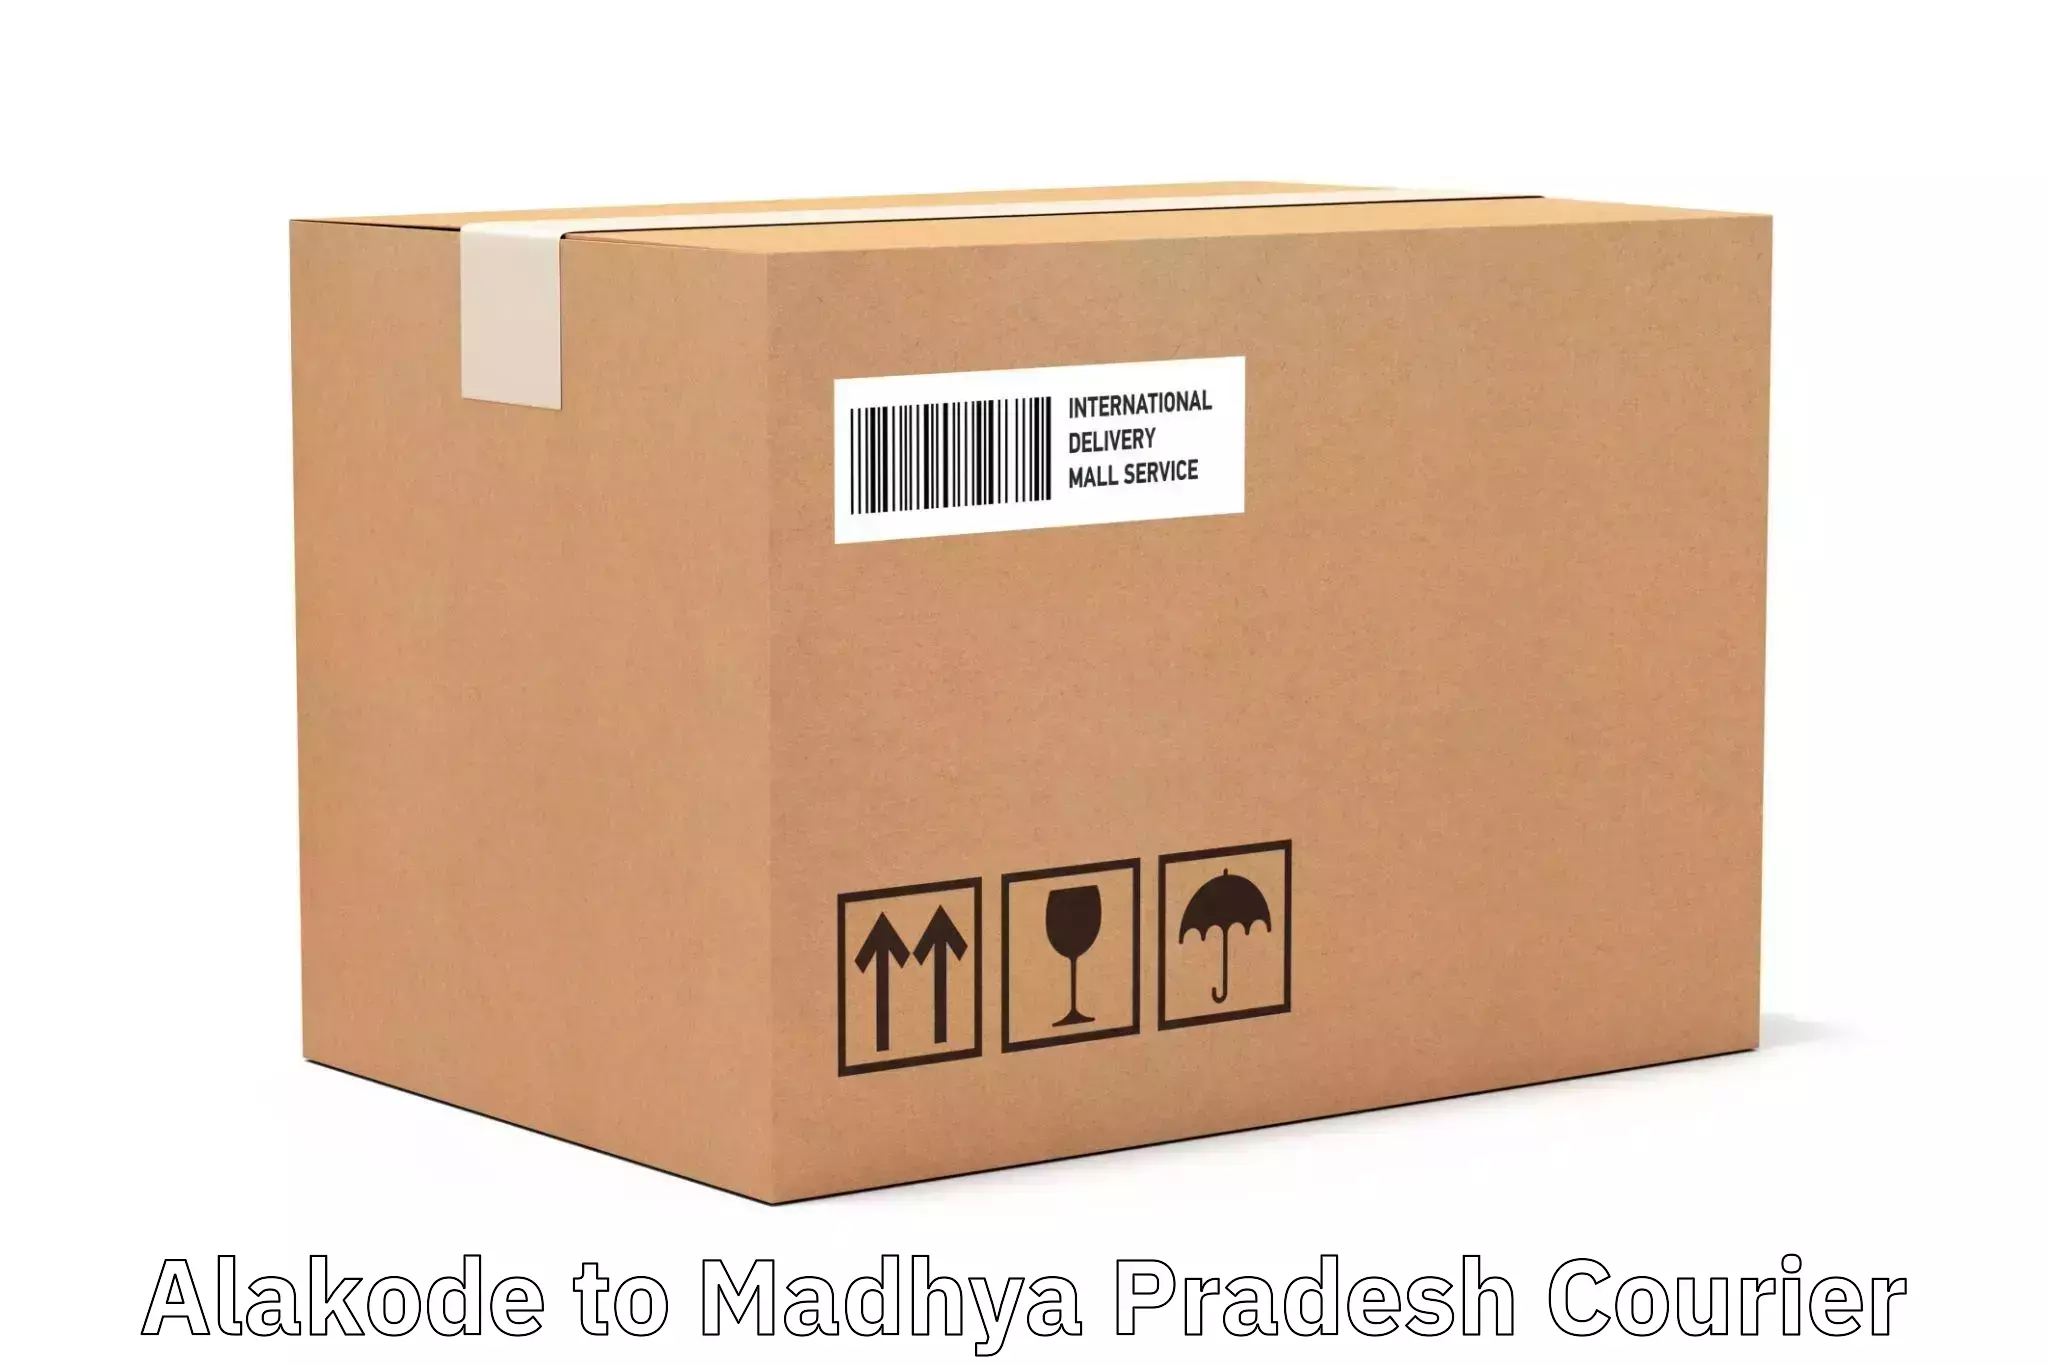 Express courier facilities in Alakode to Chhatarpur